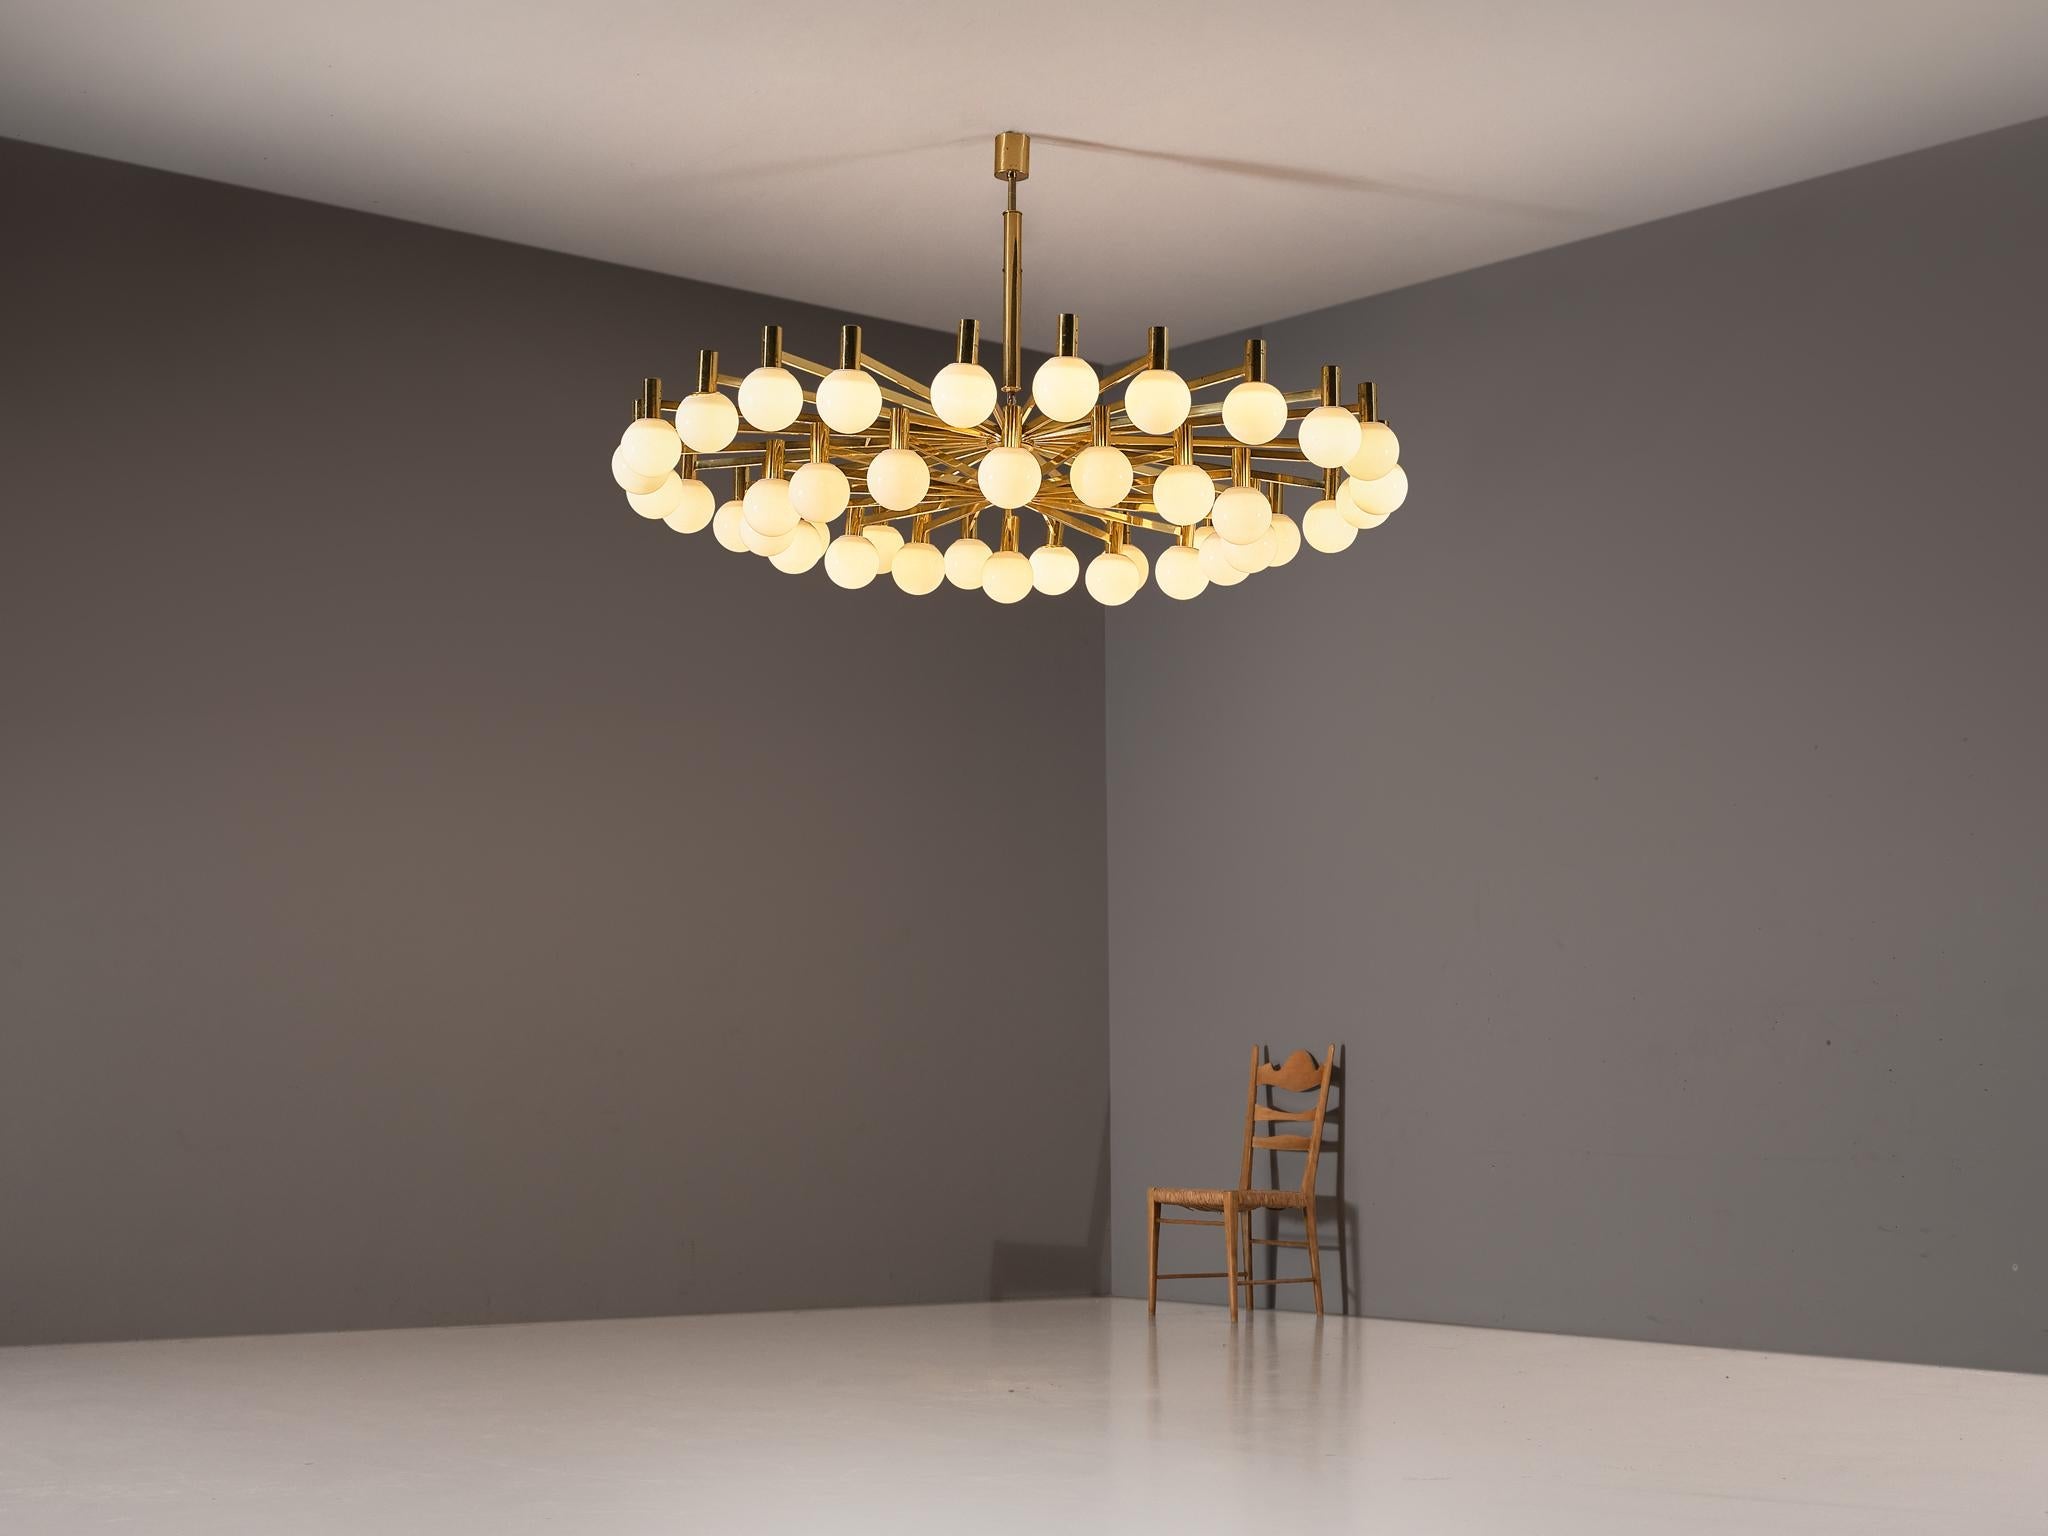 Grand Chandelier in Brass and Milk Glass Spheres 214 cm/84.25 in. Wide